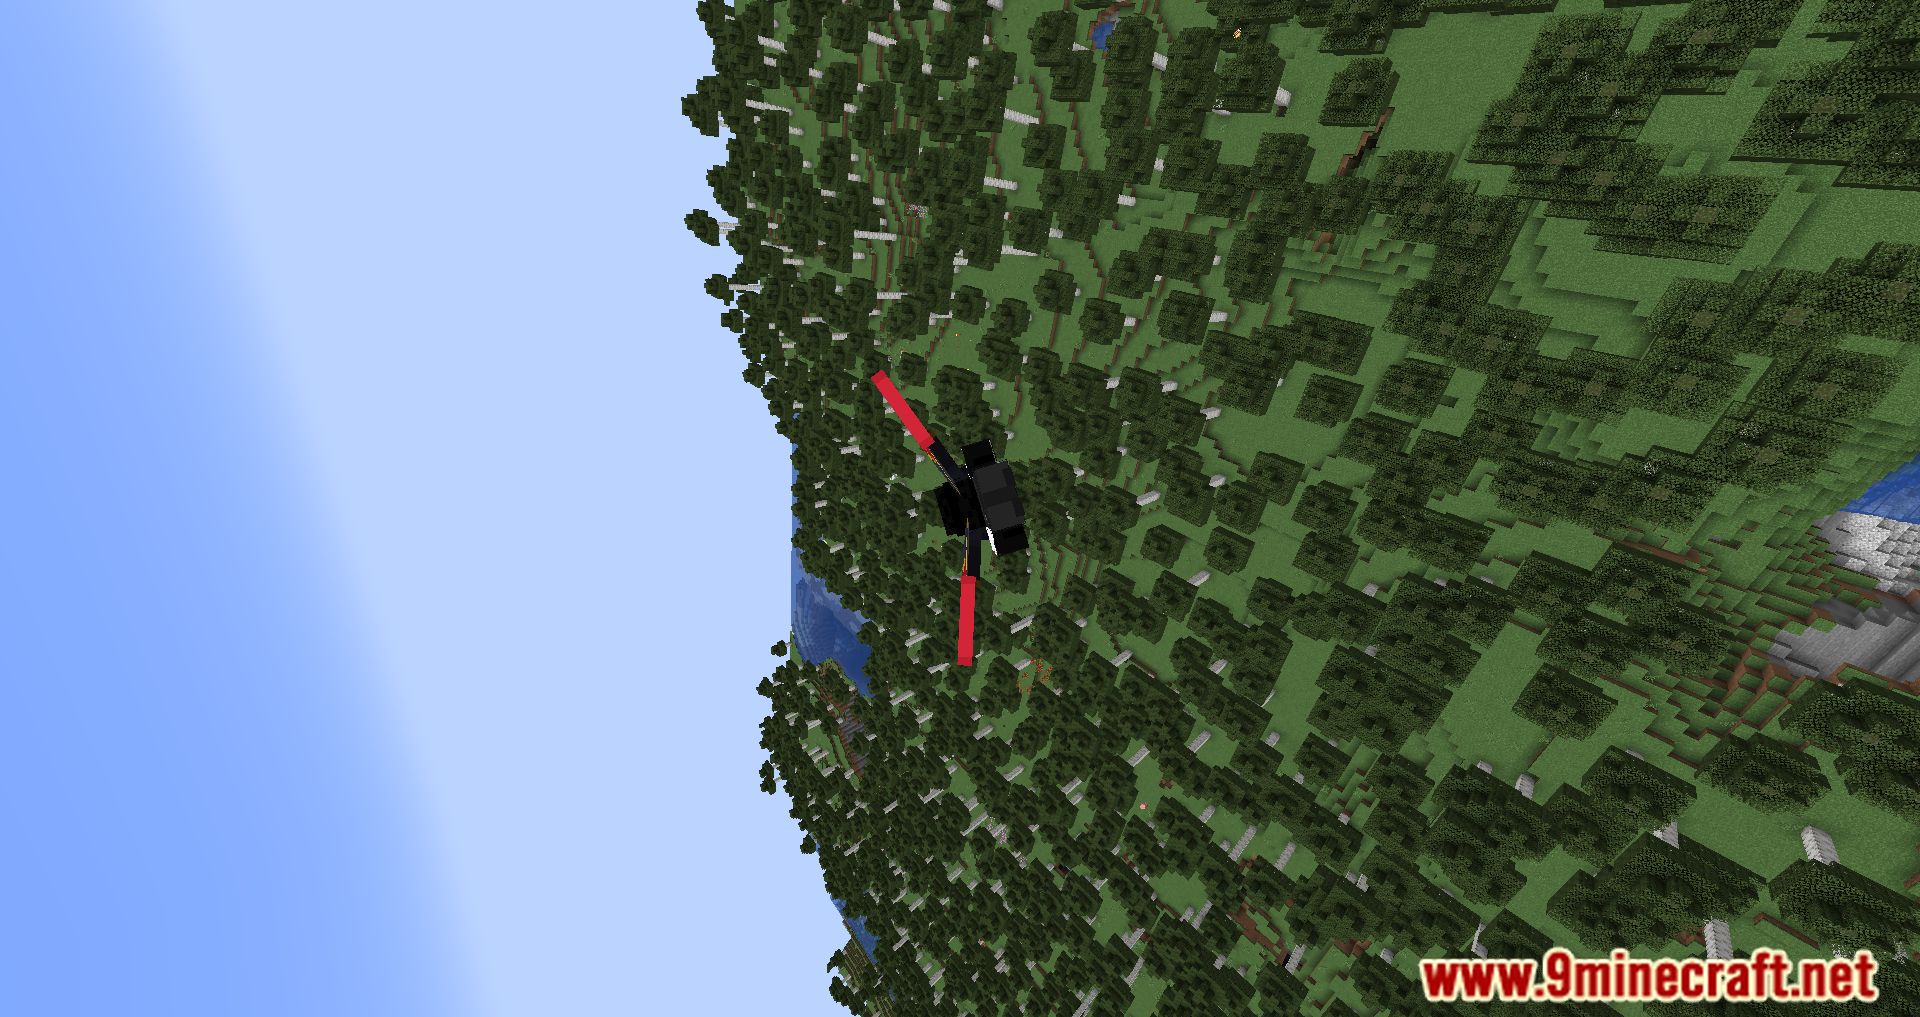 Elytra Flight Part 5, with Do a Barrel Roll mod and Only Flight map. #